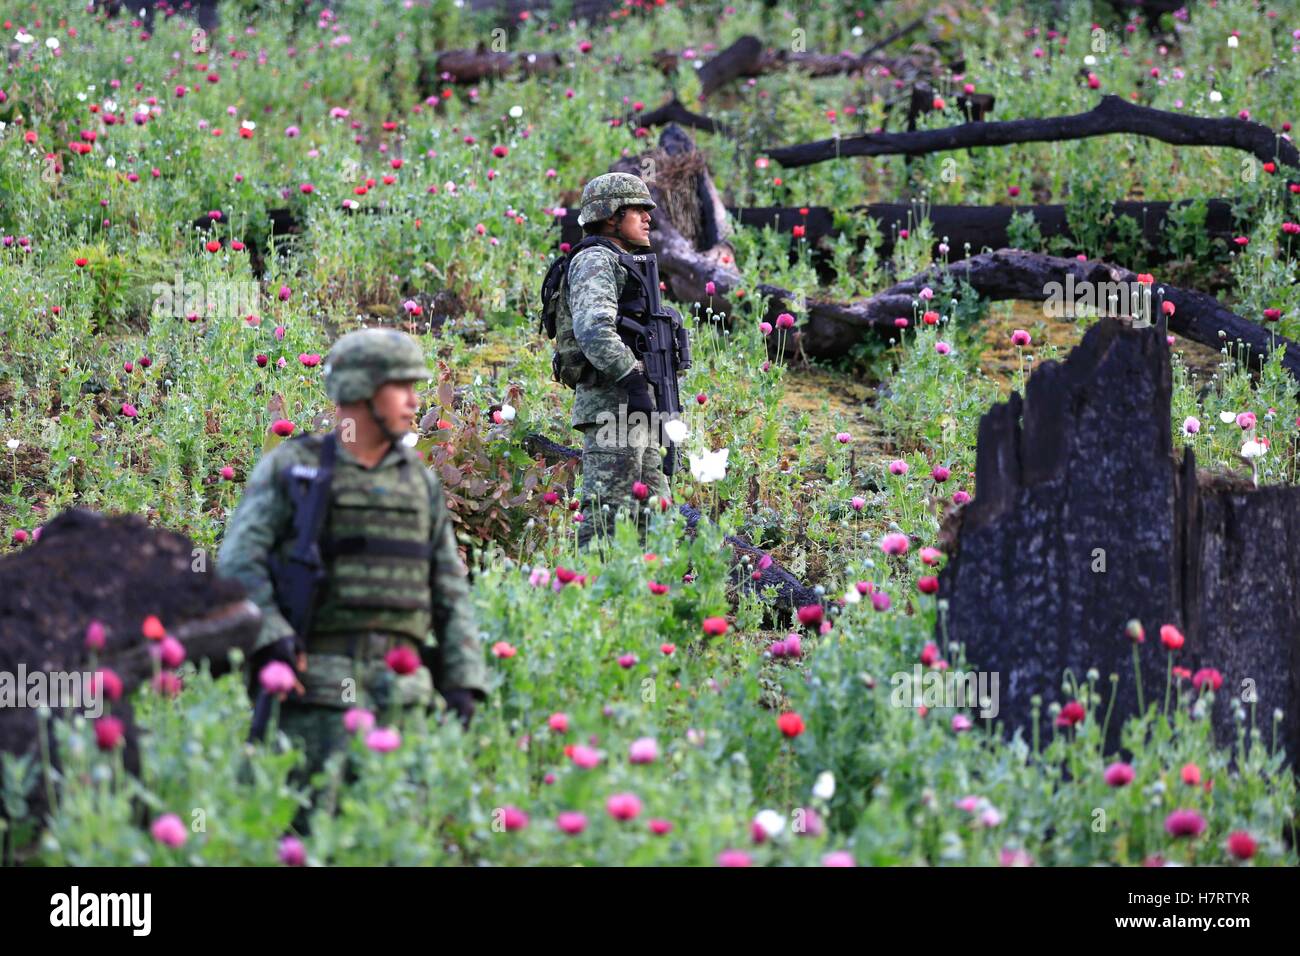 Guerrero, Guerrero State of Mexico. 6th Nov, 2016. Soldiers stand guard during the destruction of a hectare of poppy field in Ajuchitlan del Progreso, Guerrero State of Mexico, Nov. 6, 2016. © David Guzman/Xinhua/Alamy Live News Stock Photo